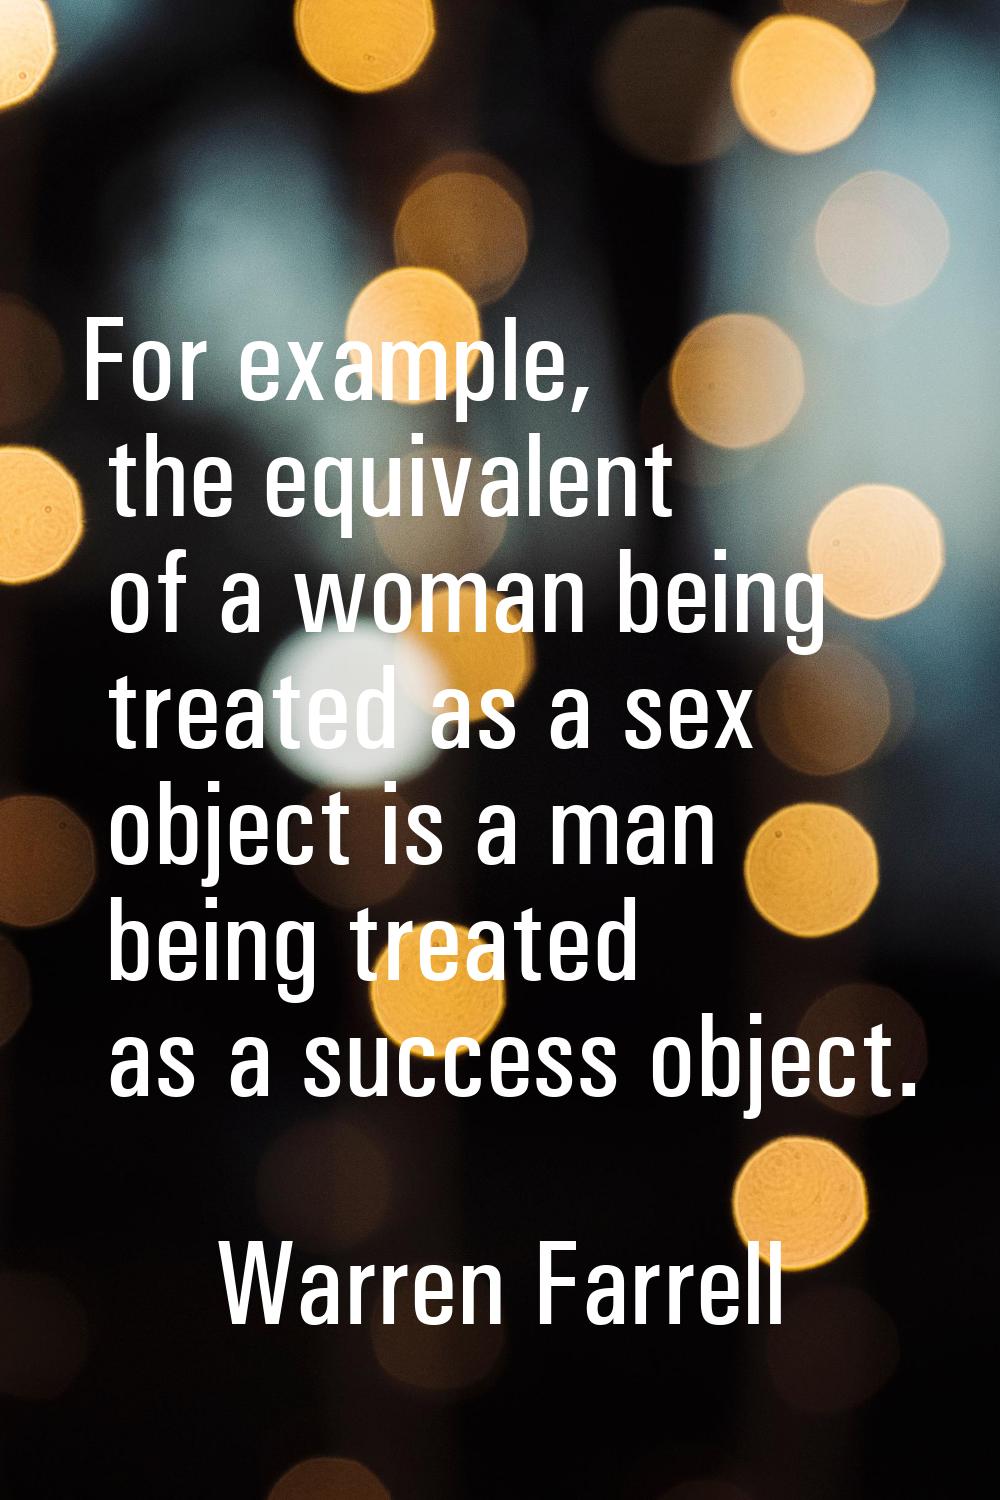 For example, the equivalent of a woman being treated as a sex object is a man being treated as a su